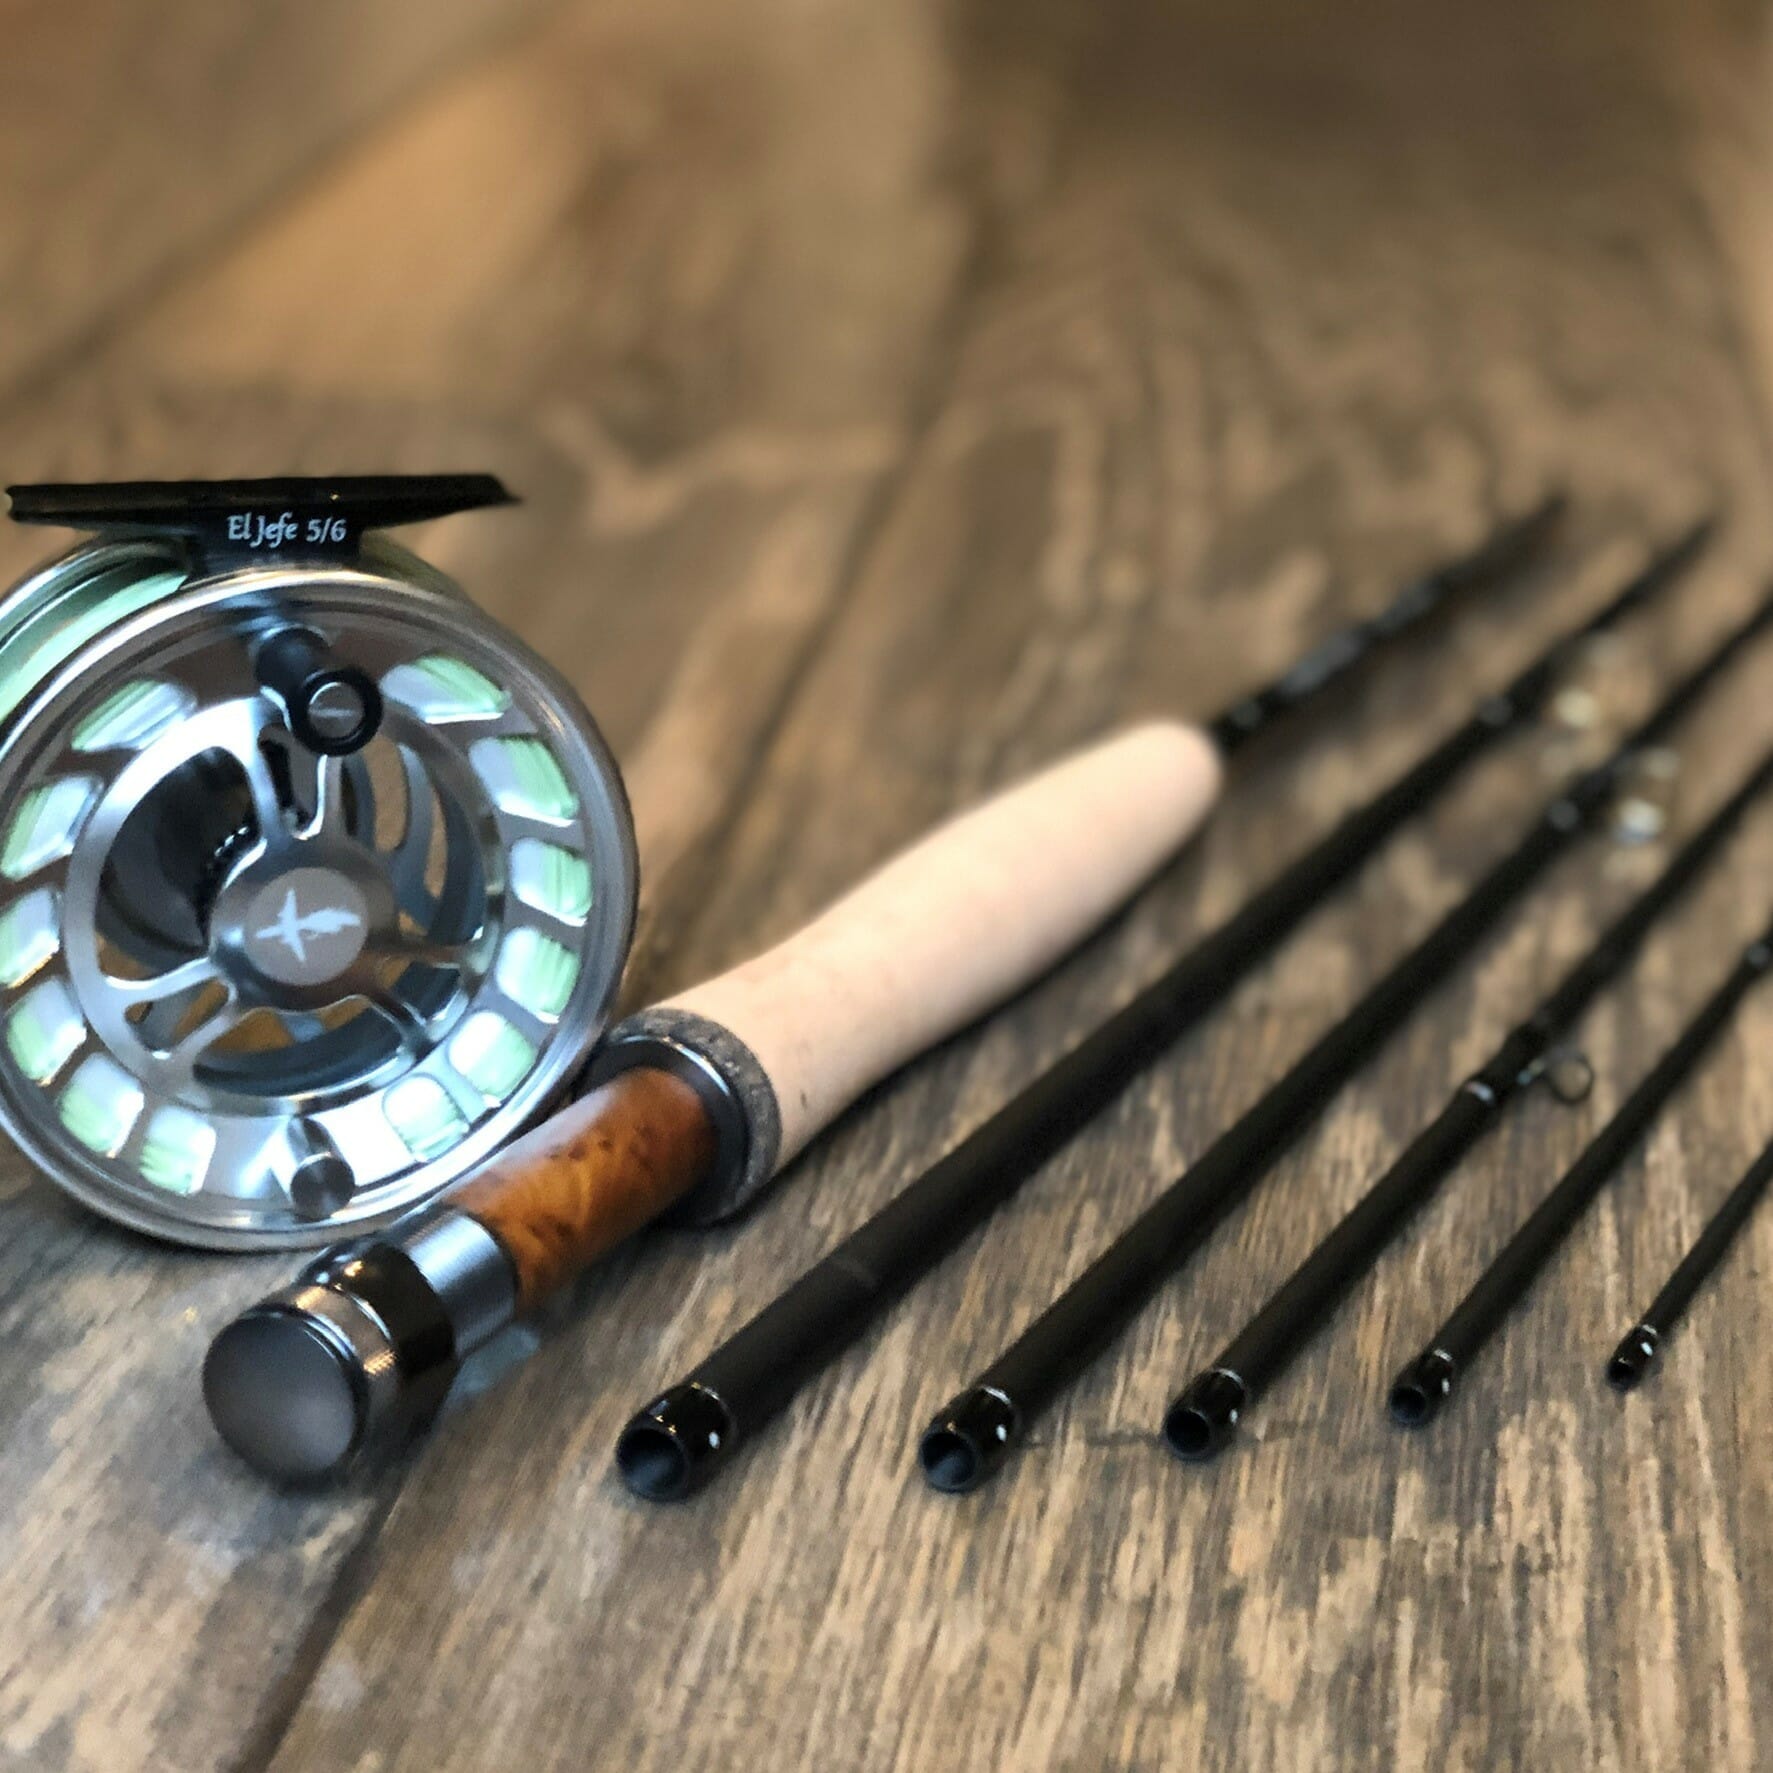 Pescador On The Fly Makes Great Gear That Travels Well - Trout Unlimited